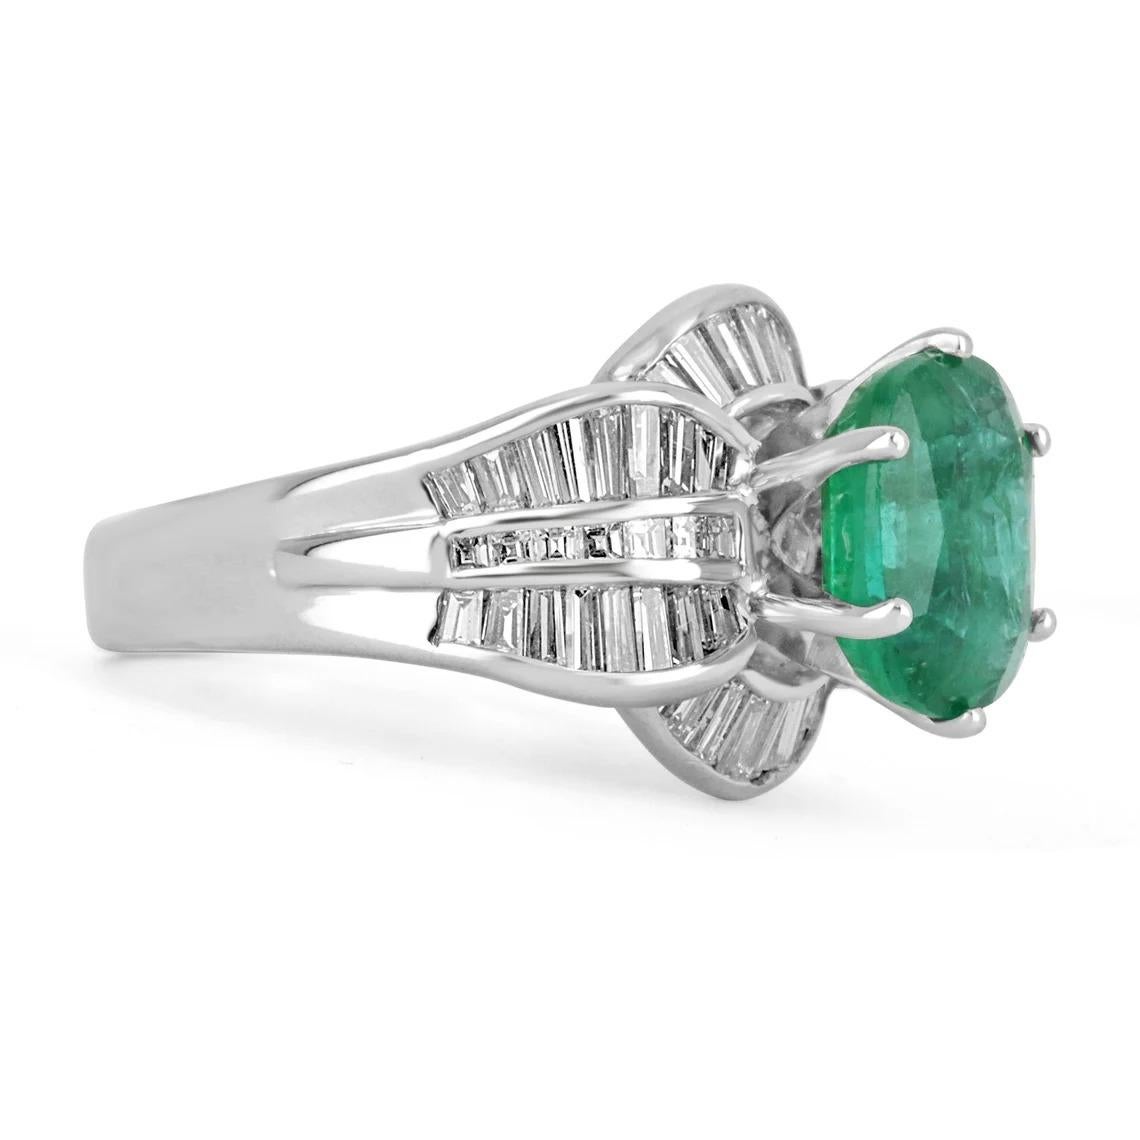 A stunning emerald and diamond cocktail/statement ring. The center stone features a magnificent 2.57-carat, natural Zambian emerald; displaying a gorgeous green color with excellent luster and characteristics. Securely set in a 6-pron setting,